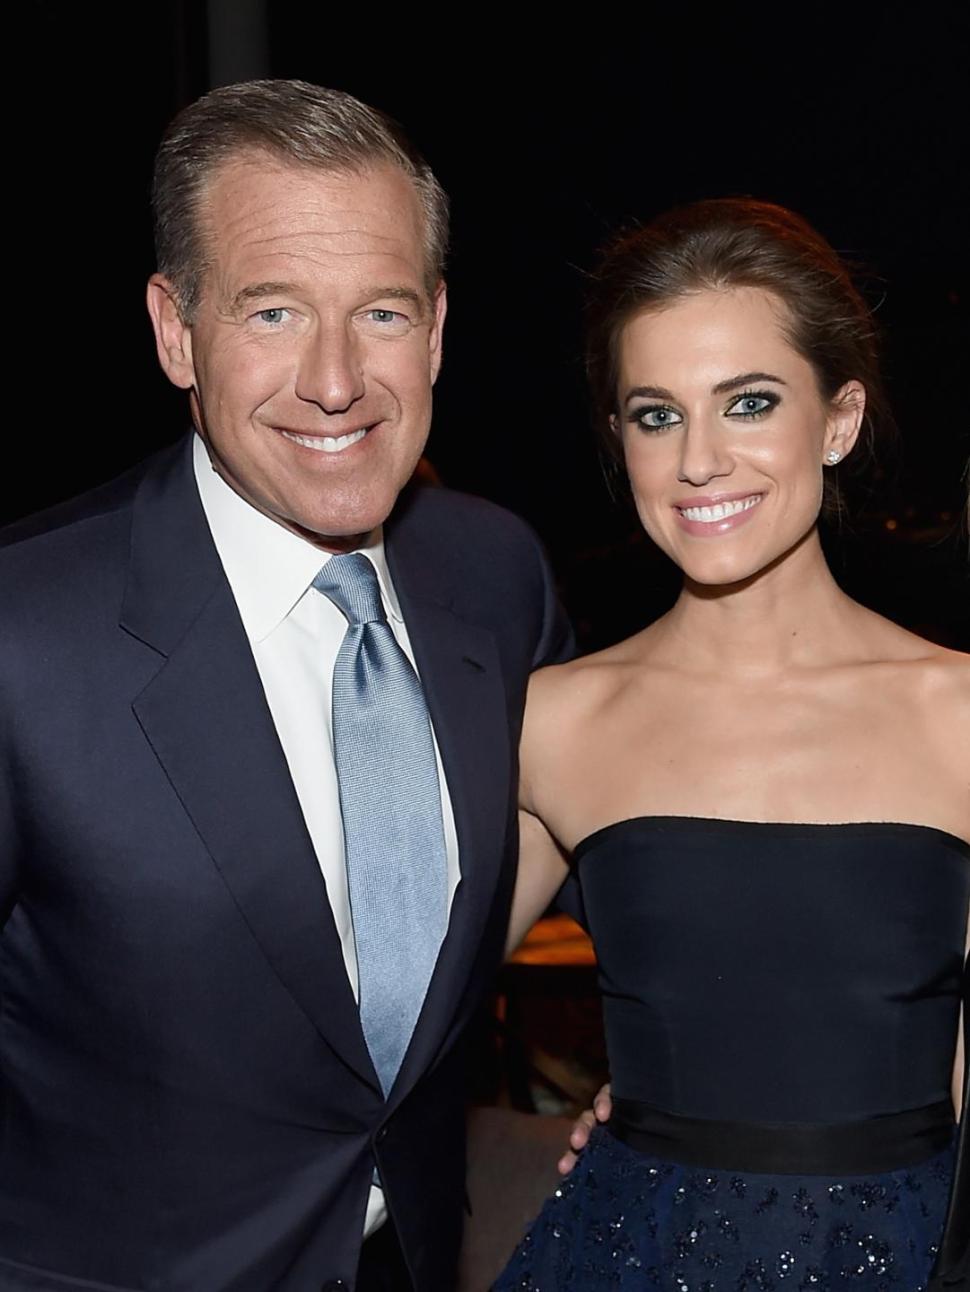 NBC News anchor Brian Williams seen with his actress daughter Allison Williams, who had an especially racy scene in recent episode of "Girls."